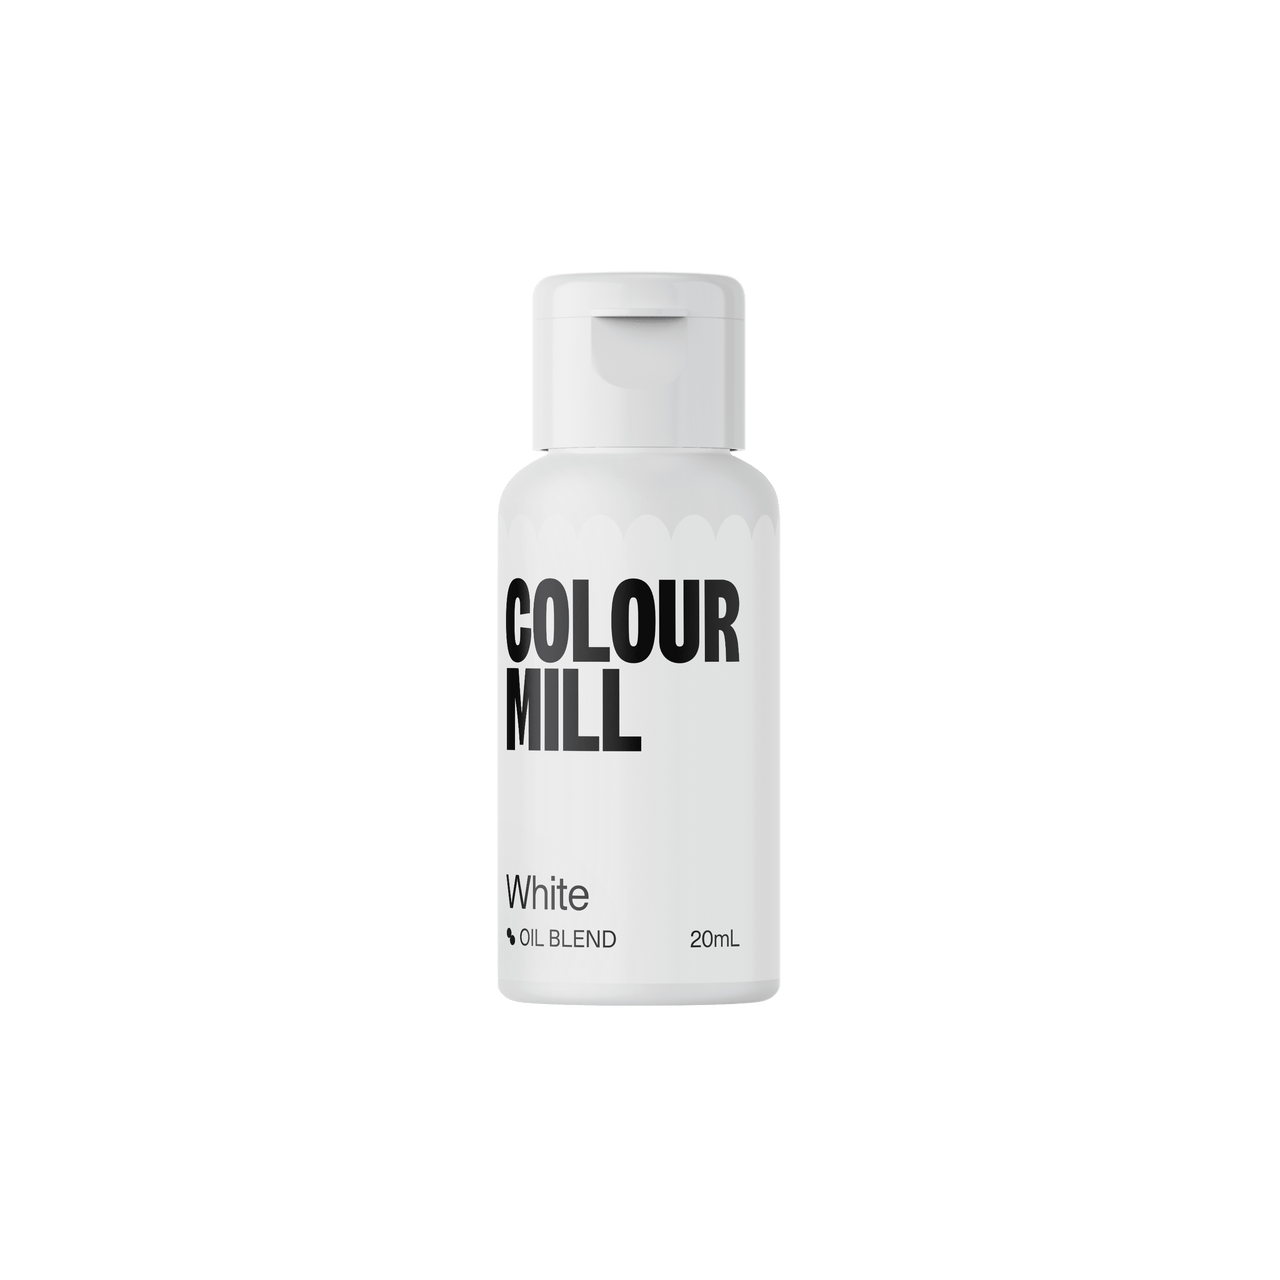 Colour Mill Oil Based Colouring - 20ml - 6 Pack - Coastal